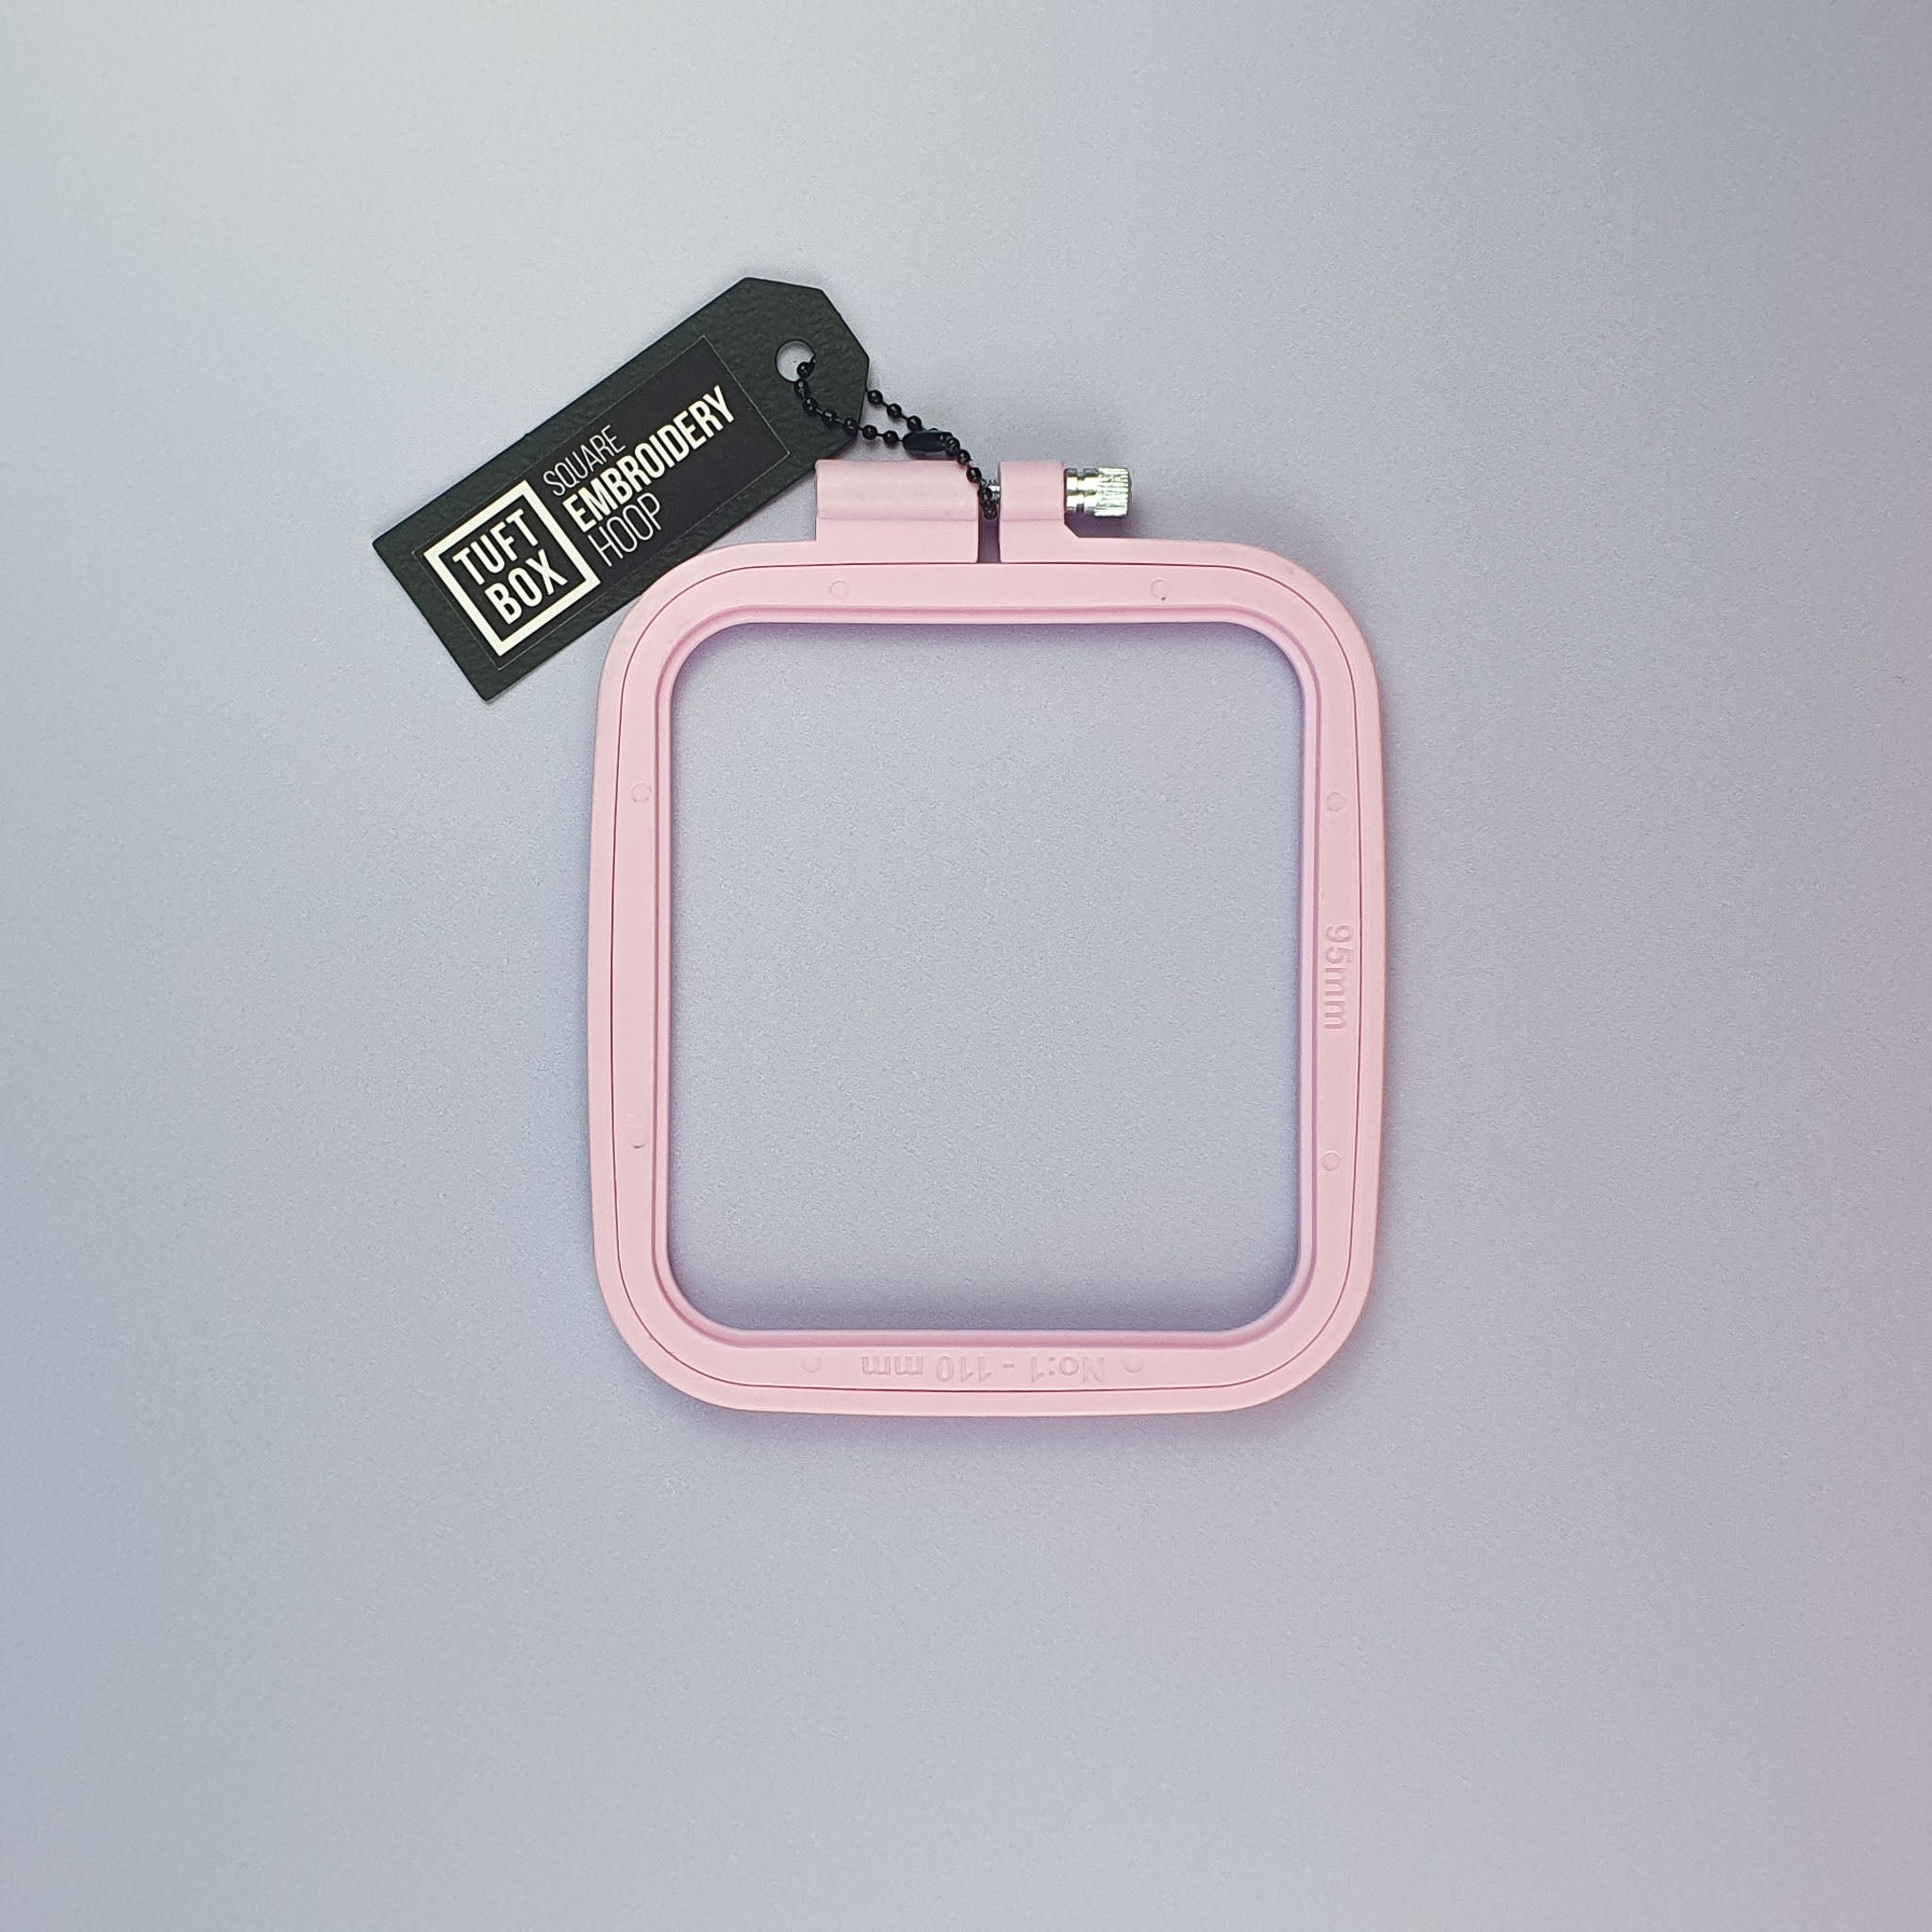 Embroidery Hoop Square Pink 9.5x11cm